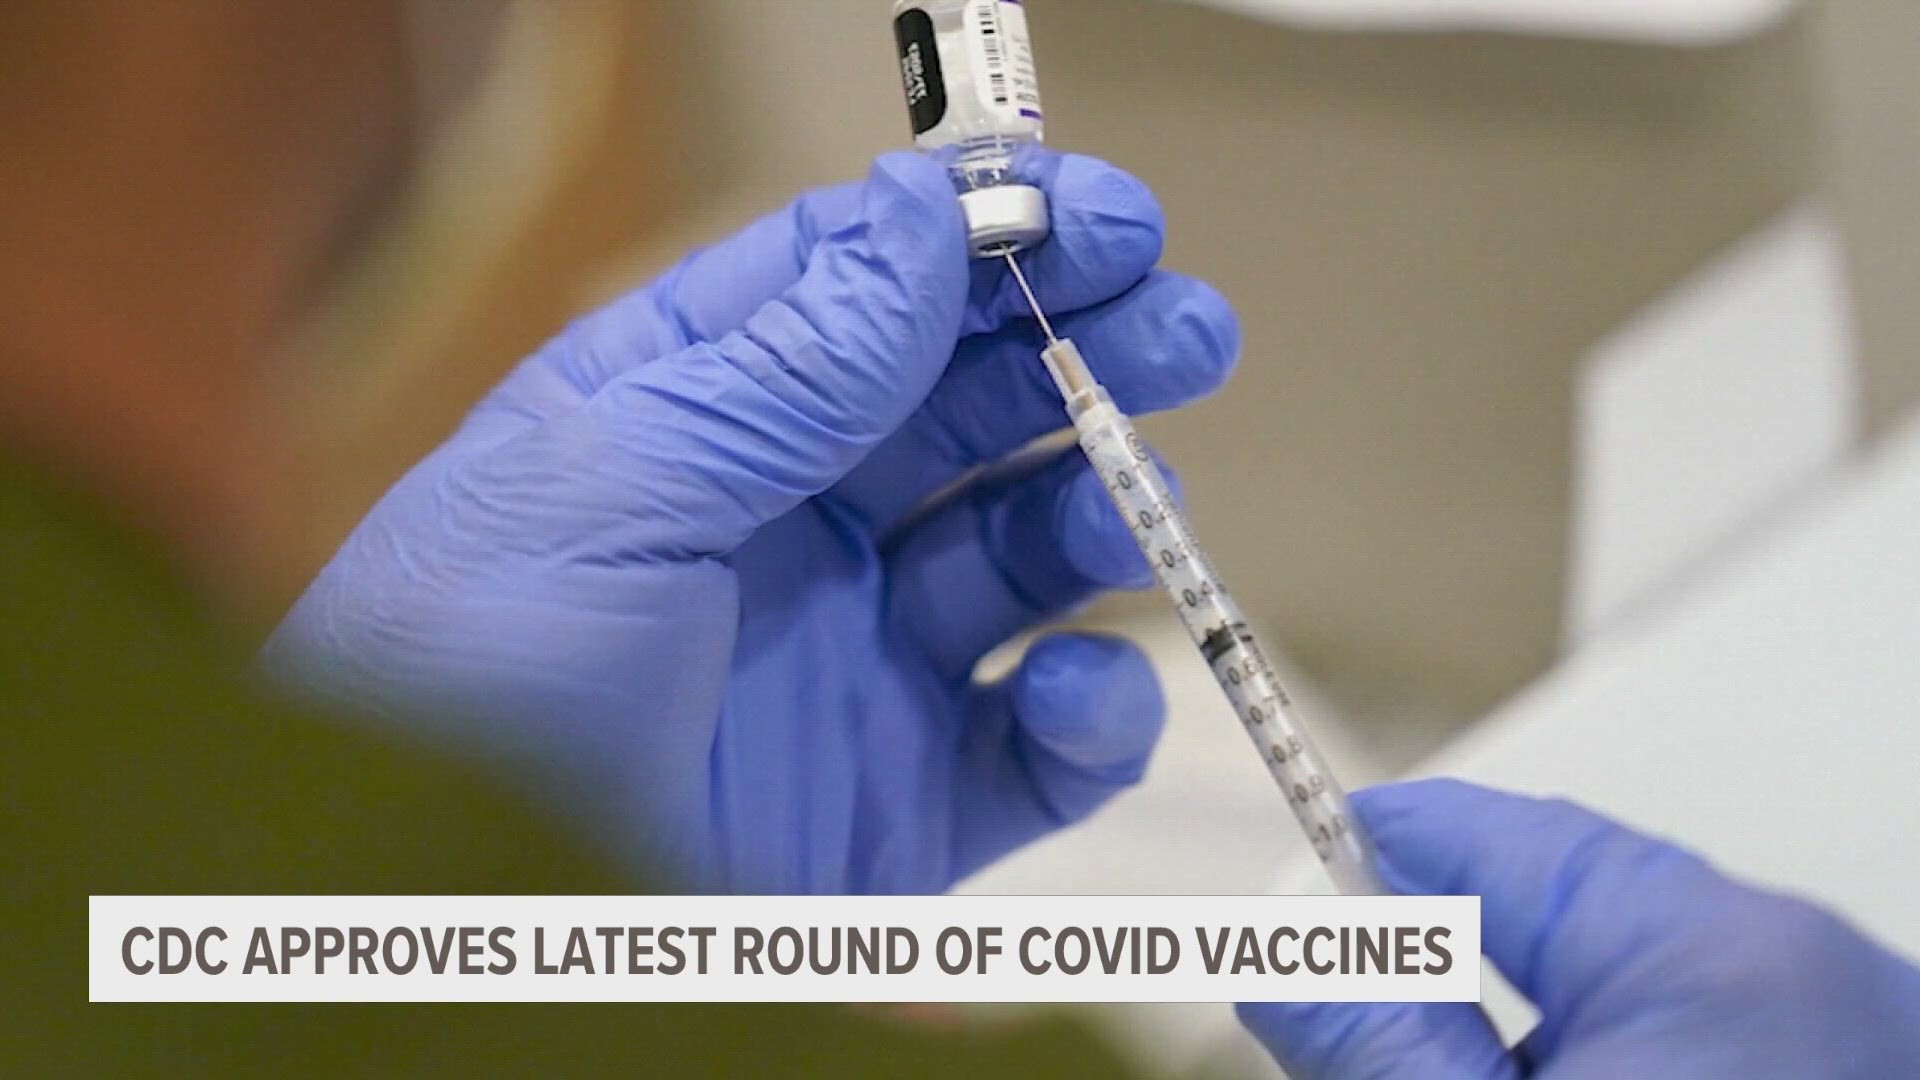 Americans will soon be able to get updated COVID-19 vaccines.